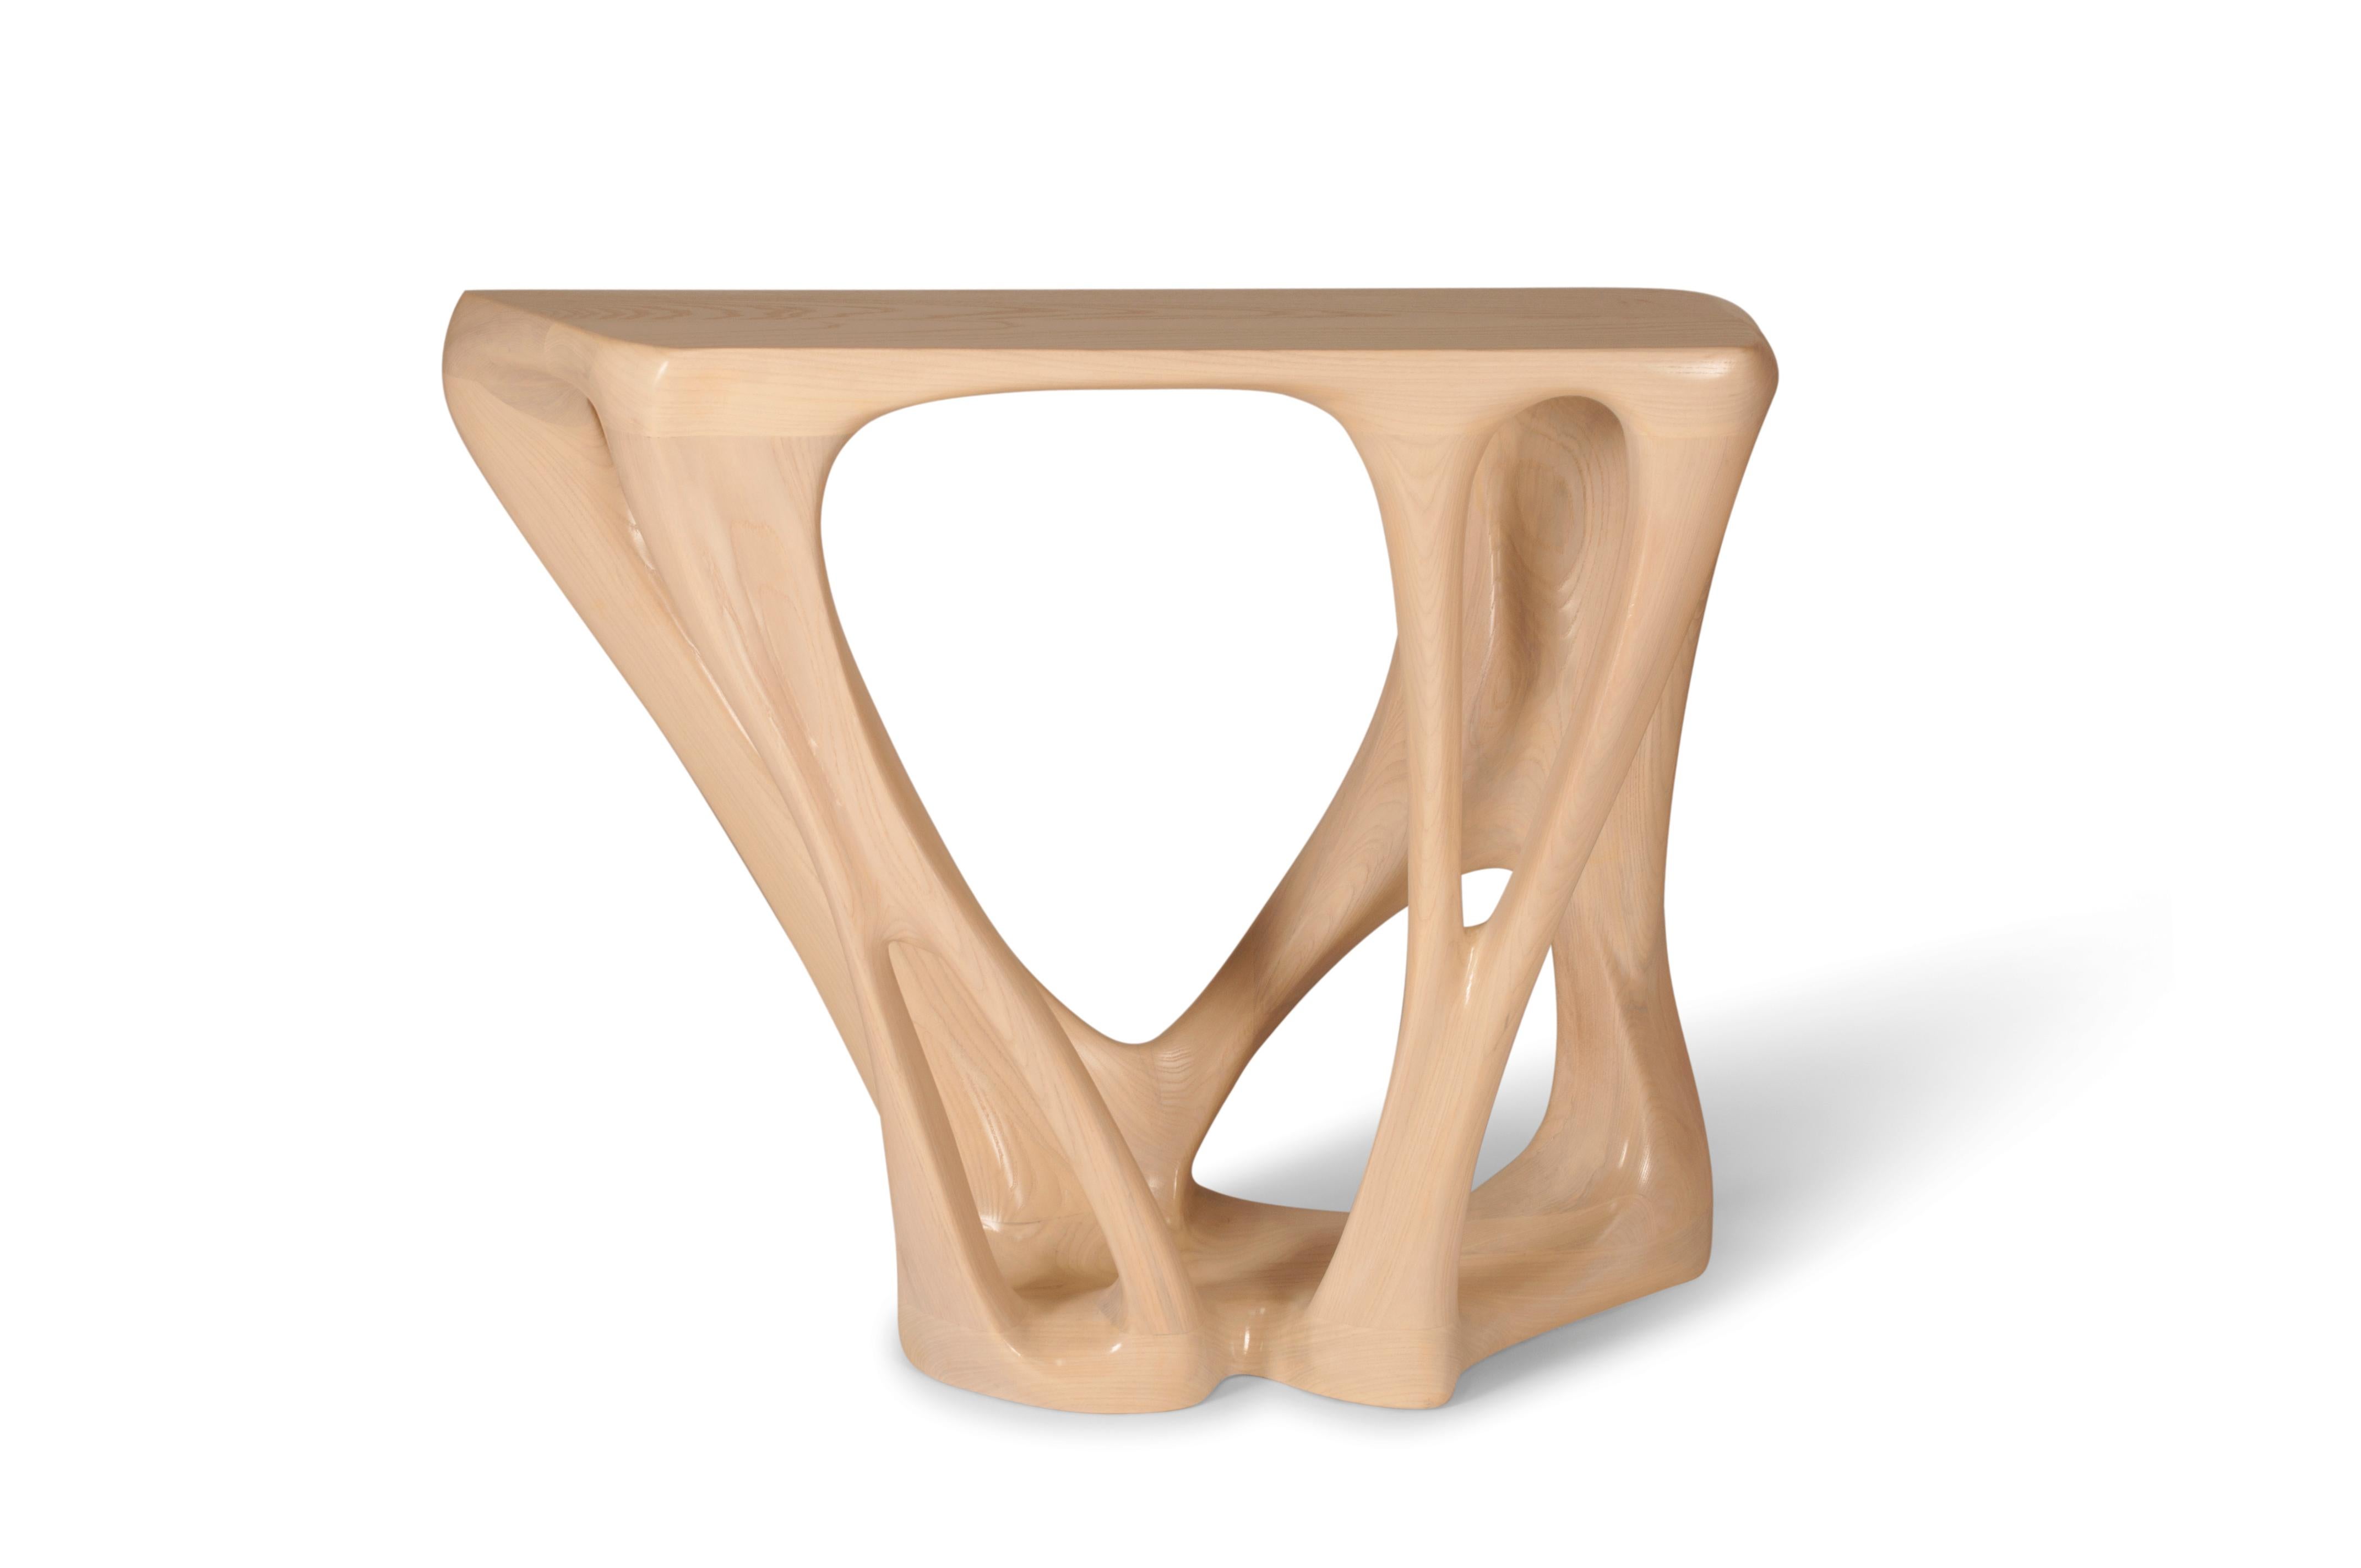 Petra console table is a stylish futuristic sculptural art table with a dynamic form designed and manufactured by Amorph. Petra is made out of solid ash wood stained with satin finish. By the nature, the ash wood grain’s look would be slightly